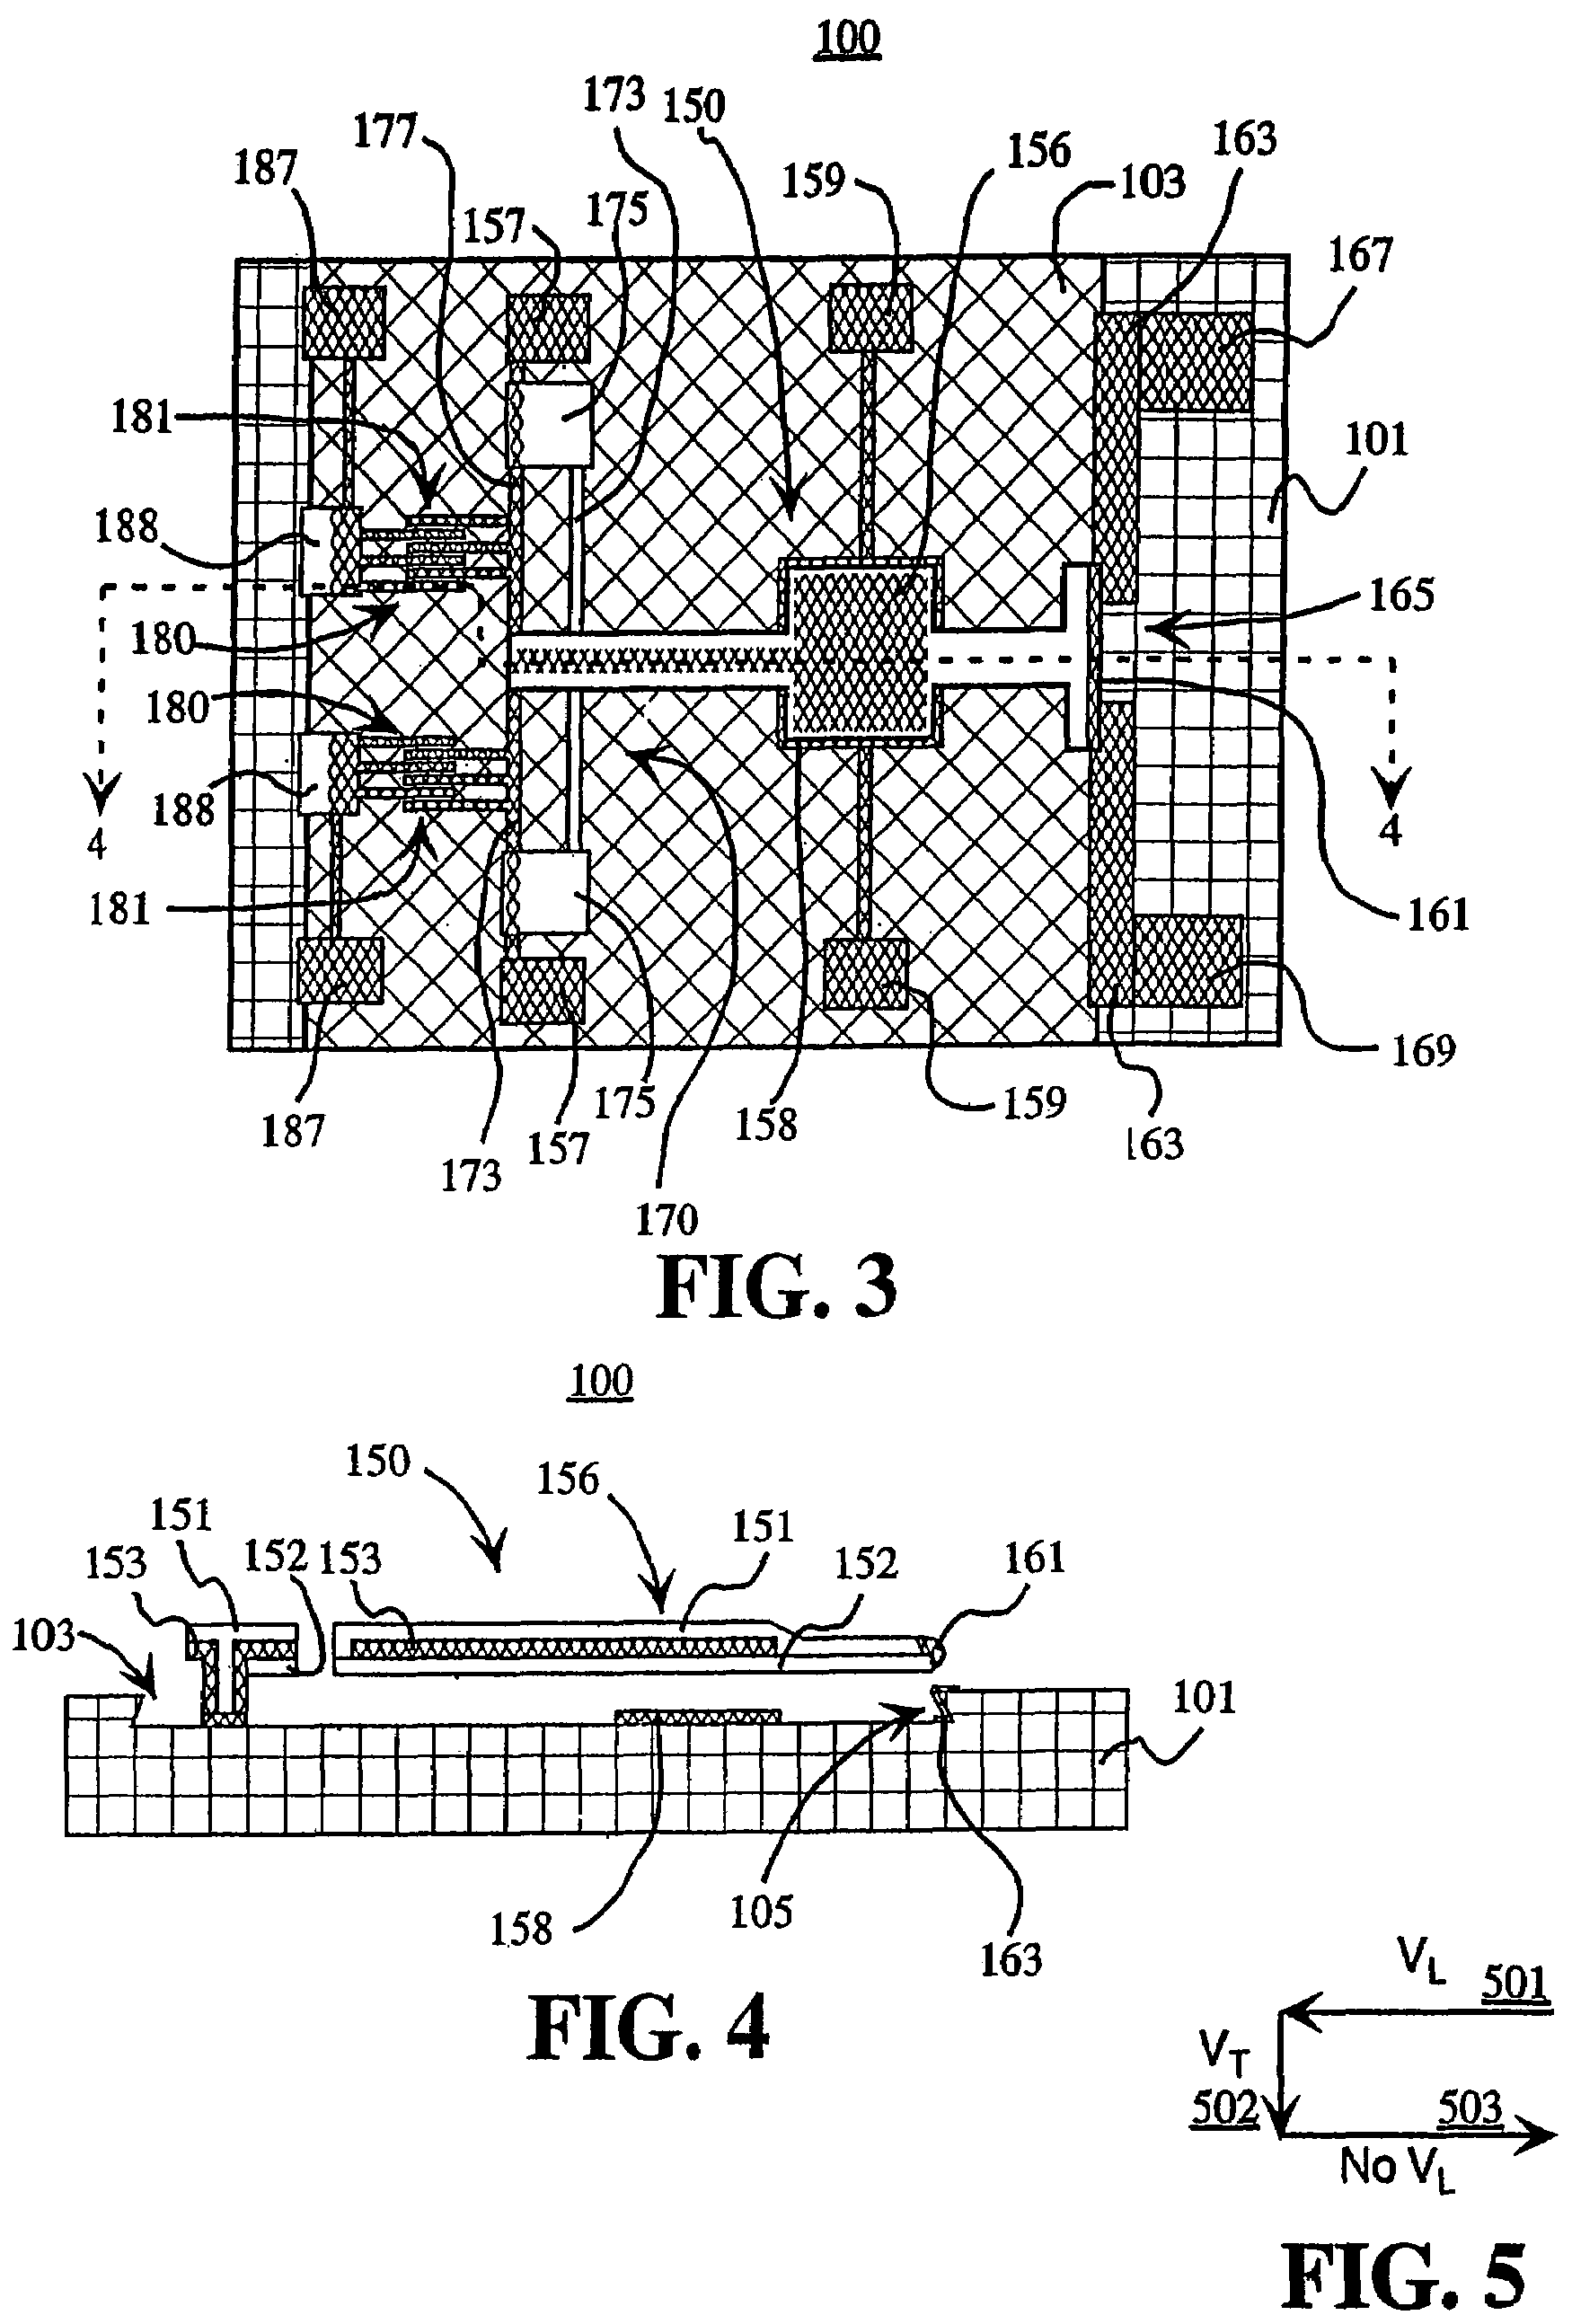 Method of fabricating an RF MEMS switch with spring-loaded latching mechanism